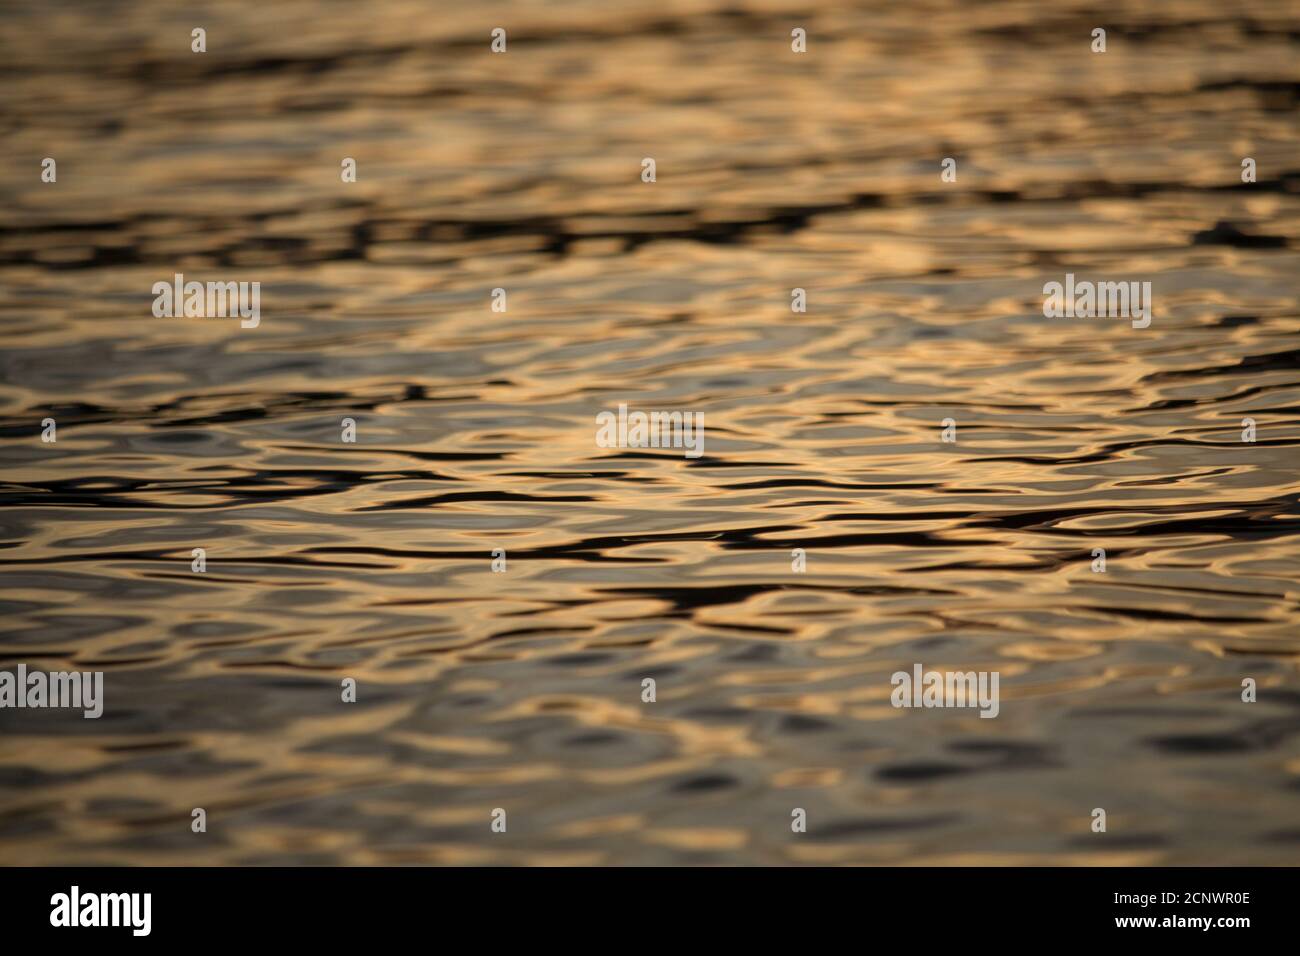 water background with warm tone ripples effect on water during sunset Stock Photo